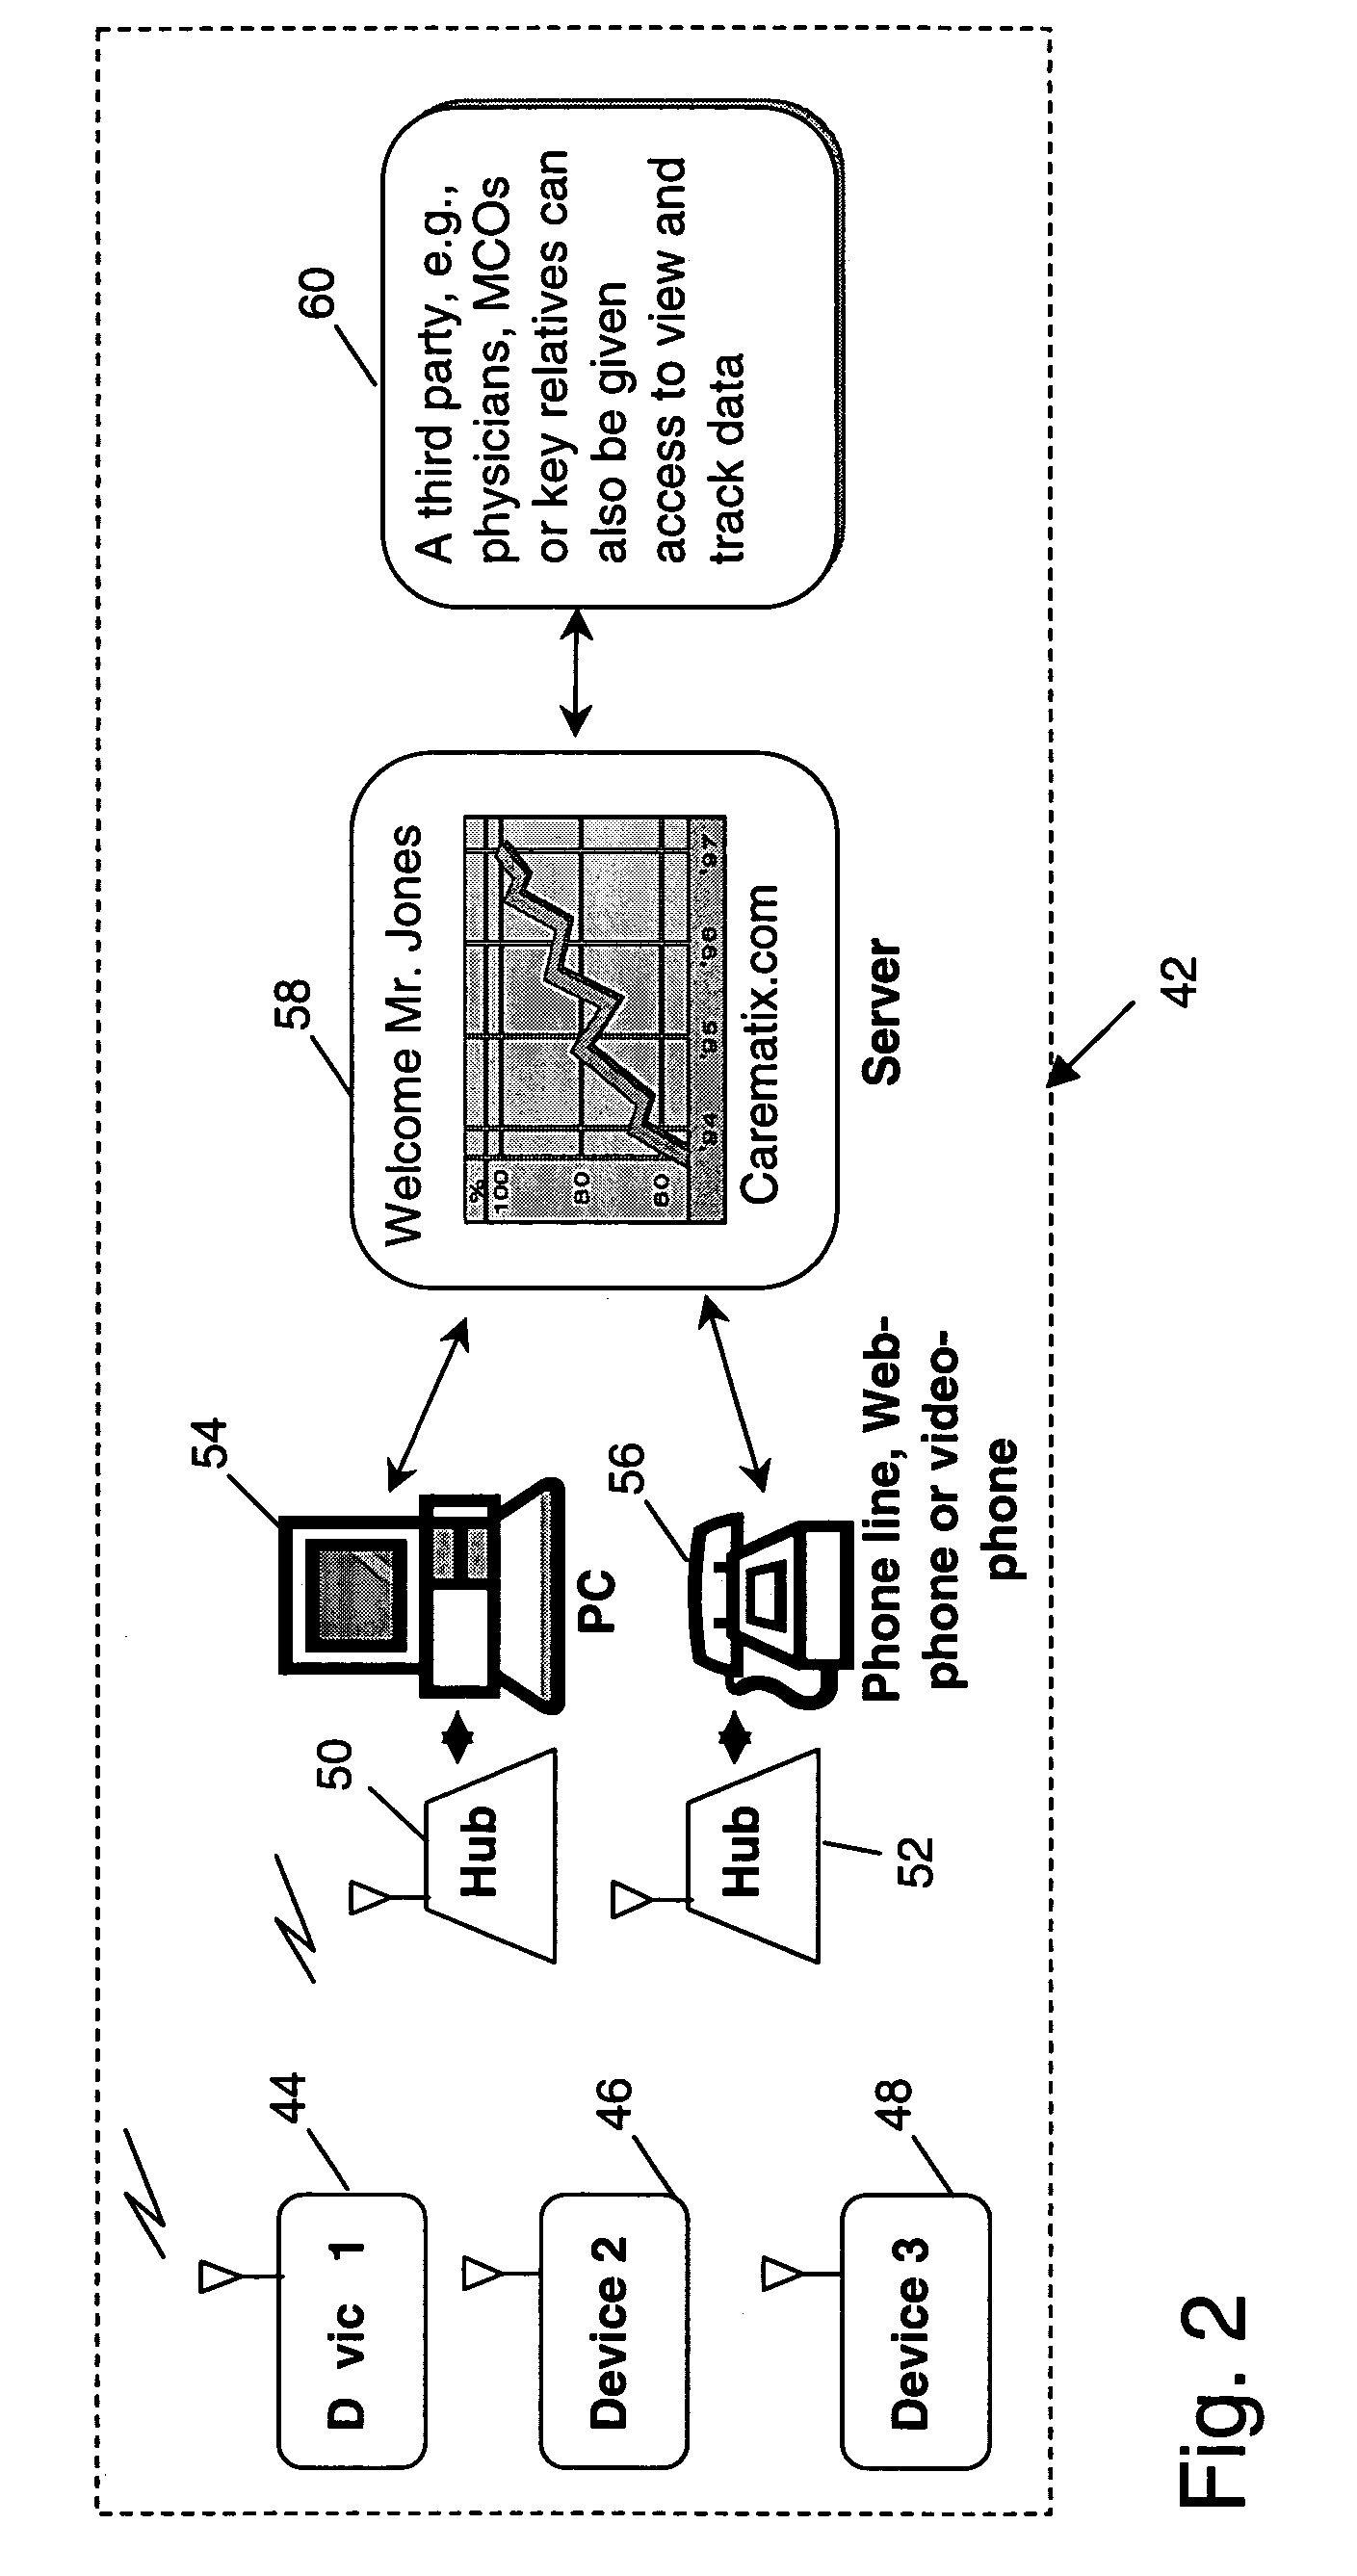 Method and apparatus for remotely monitoring the condition of a patient